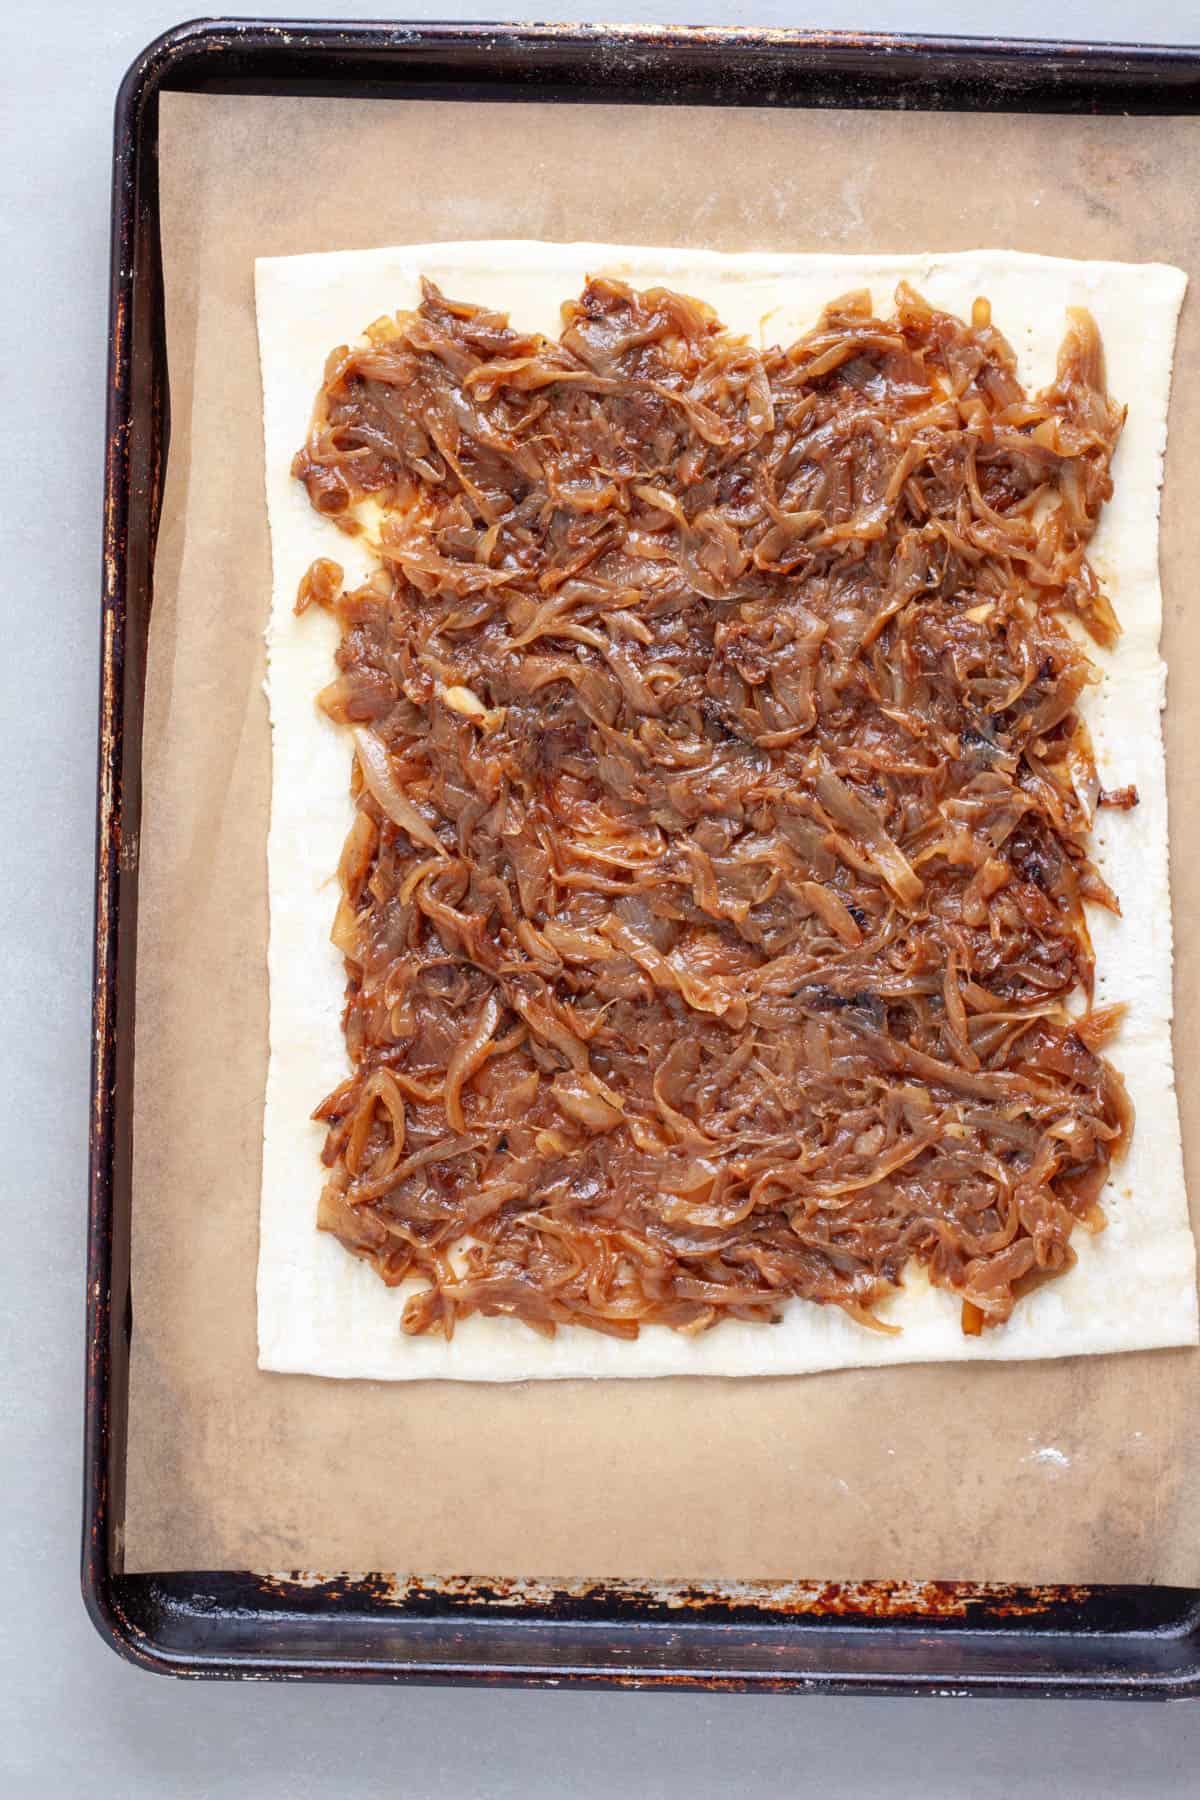 Caramelized onions spread in an even layer on a rolled out sheet of puff pastry.